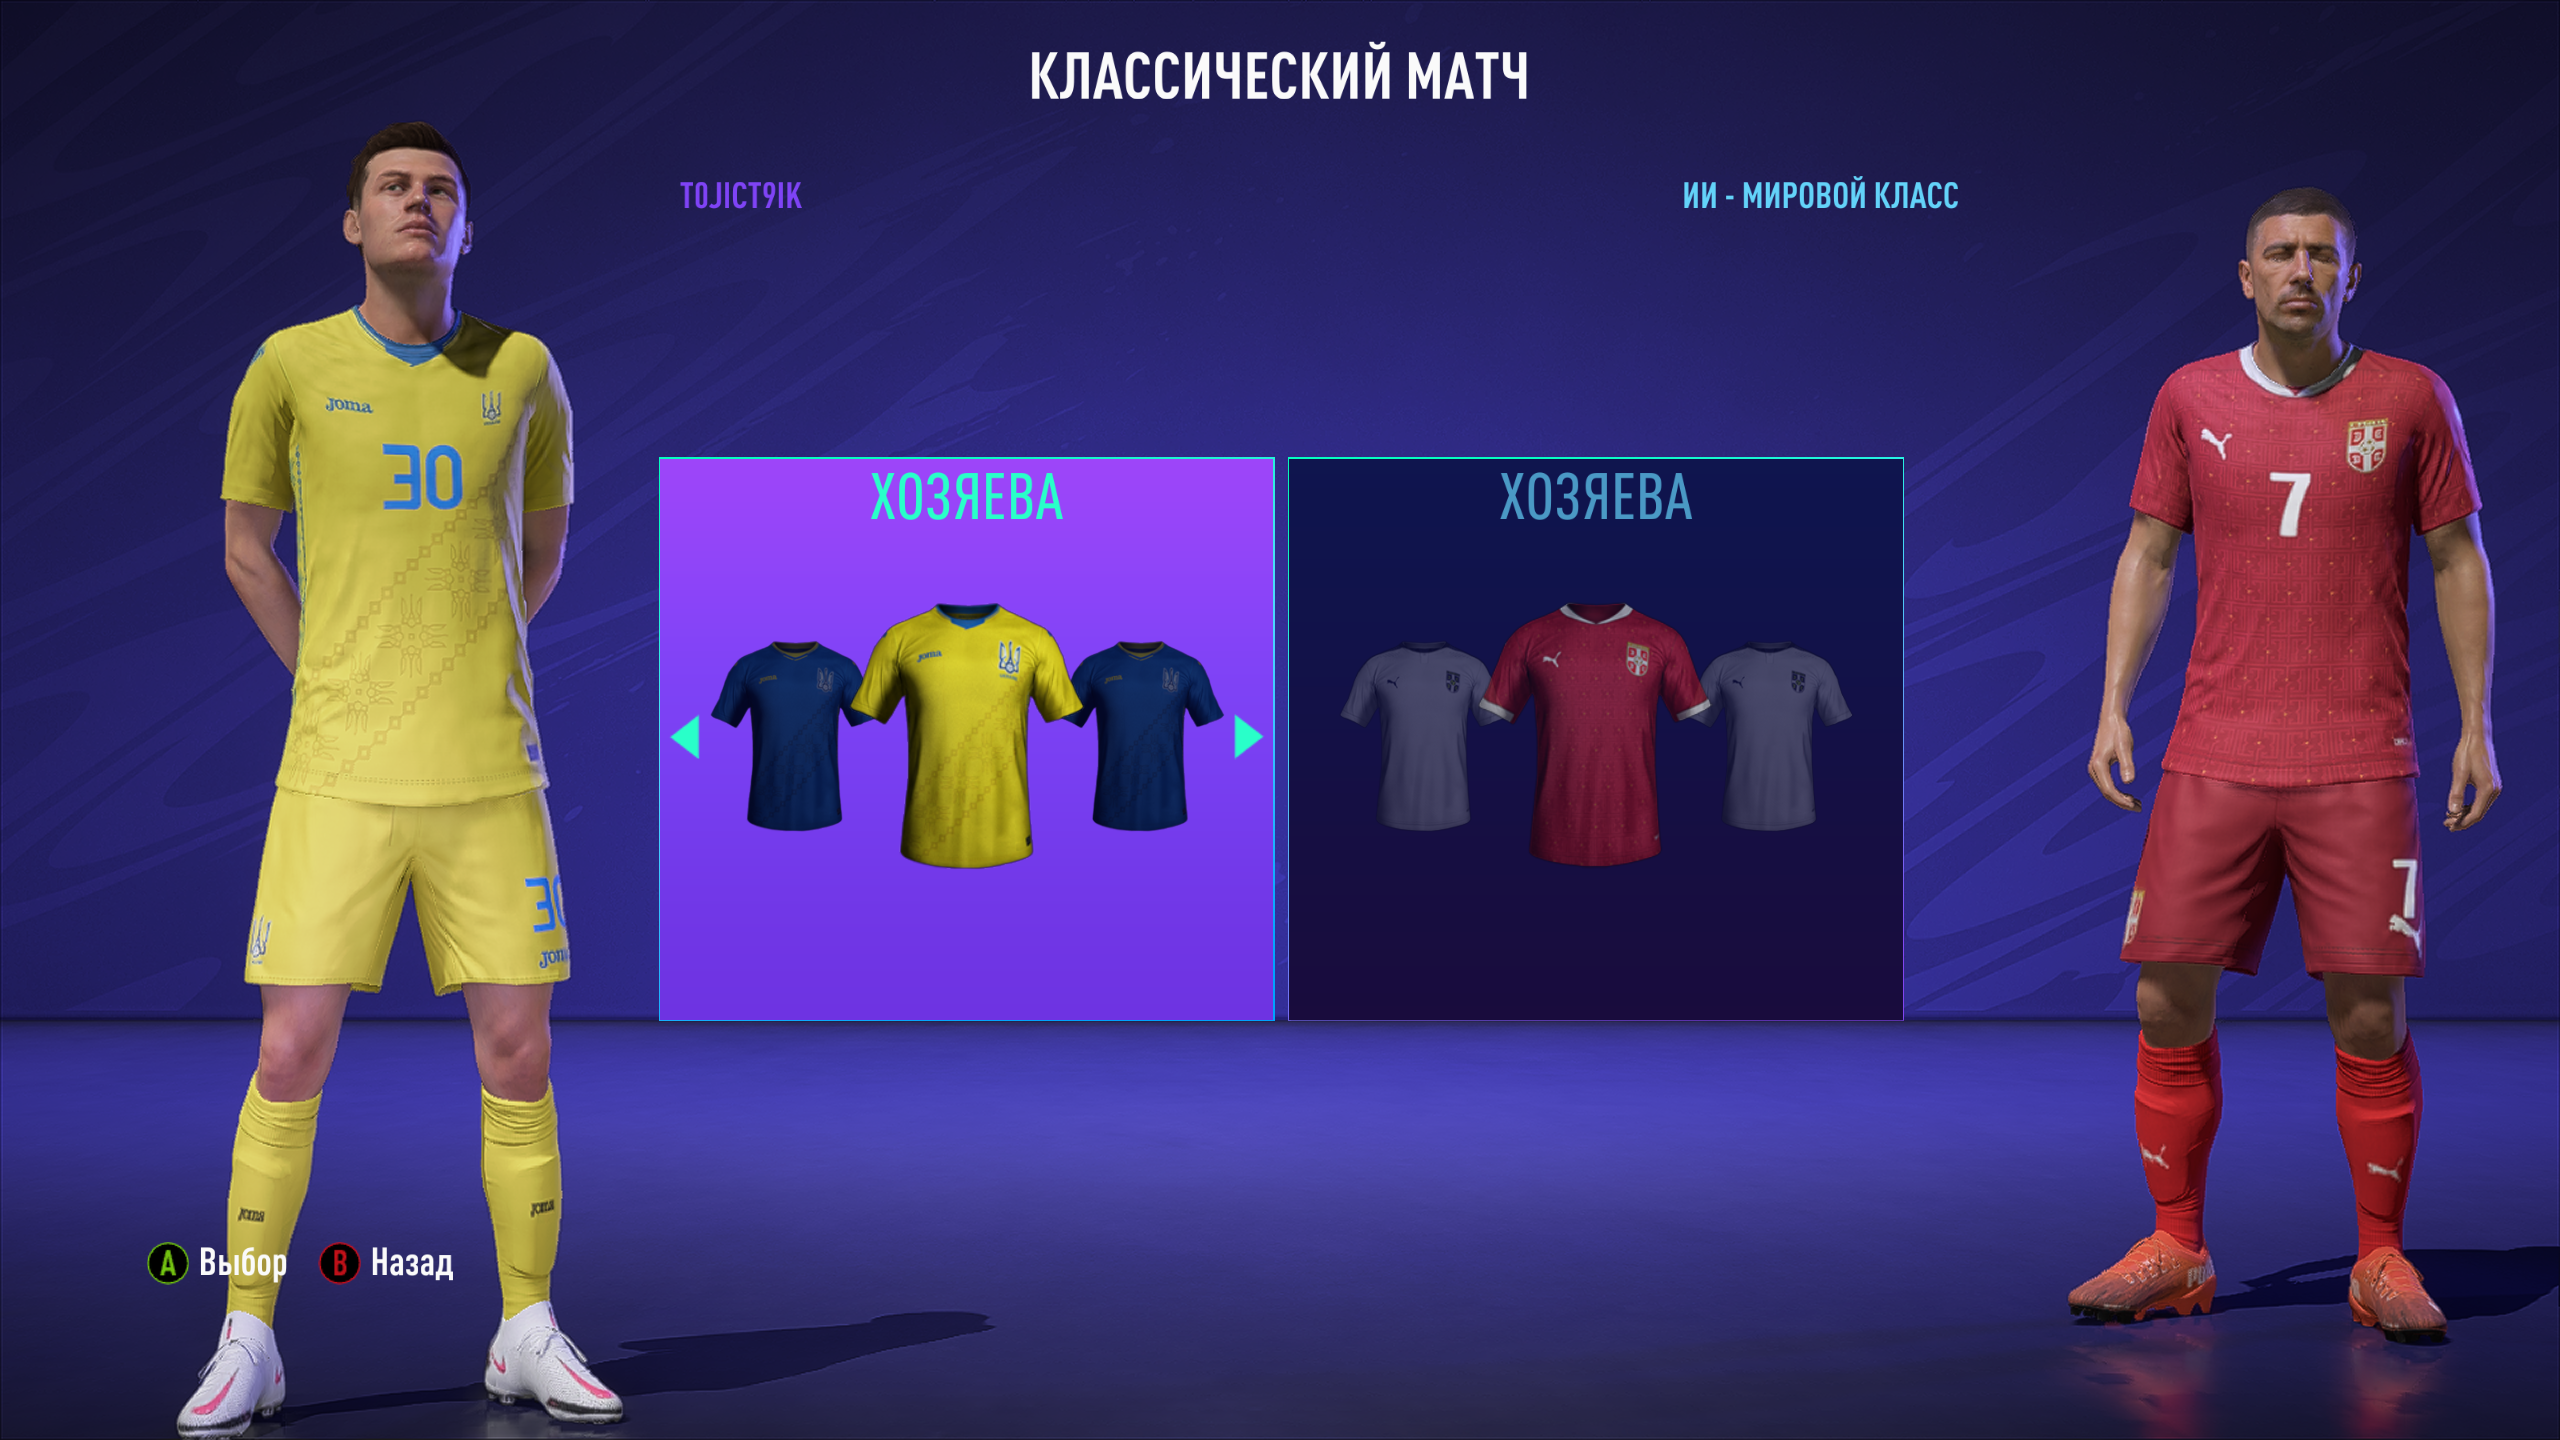 Fifa mod manager fifa 24. FIFA 11 Expansion Patch. Вратарская форма мокап. European Expansion Patch Mod FIFA 22 картинки.